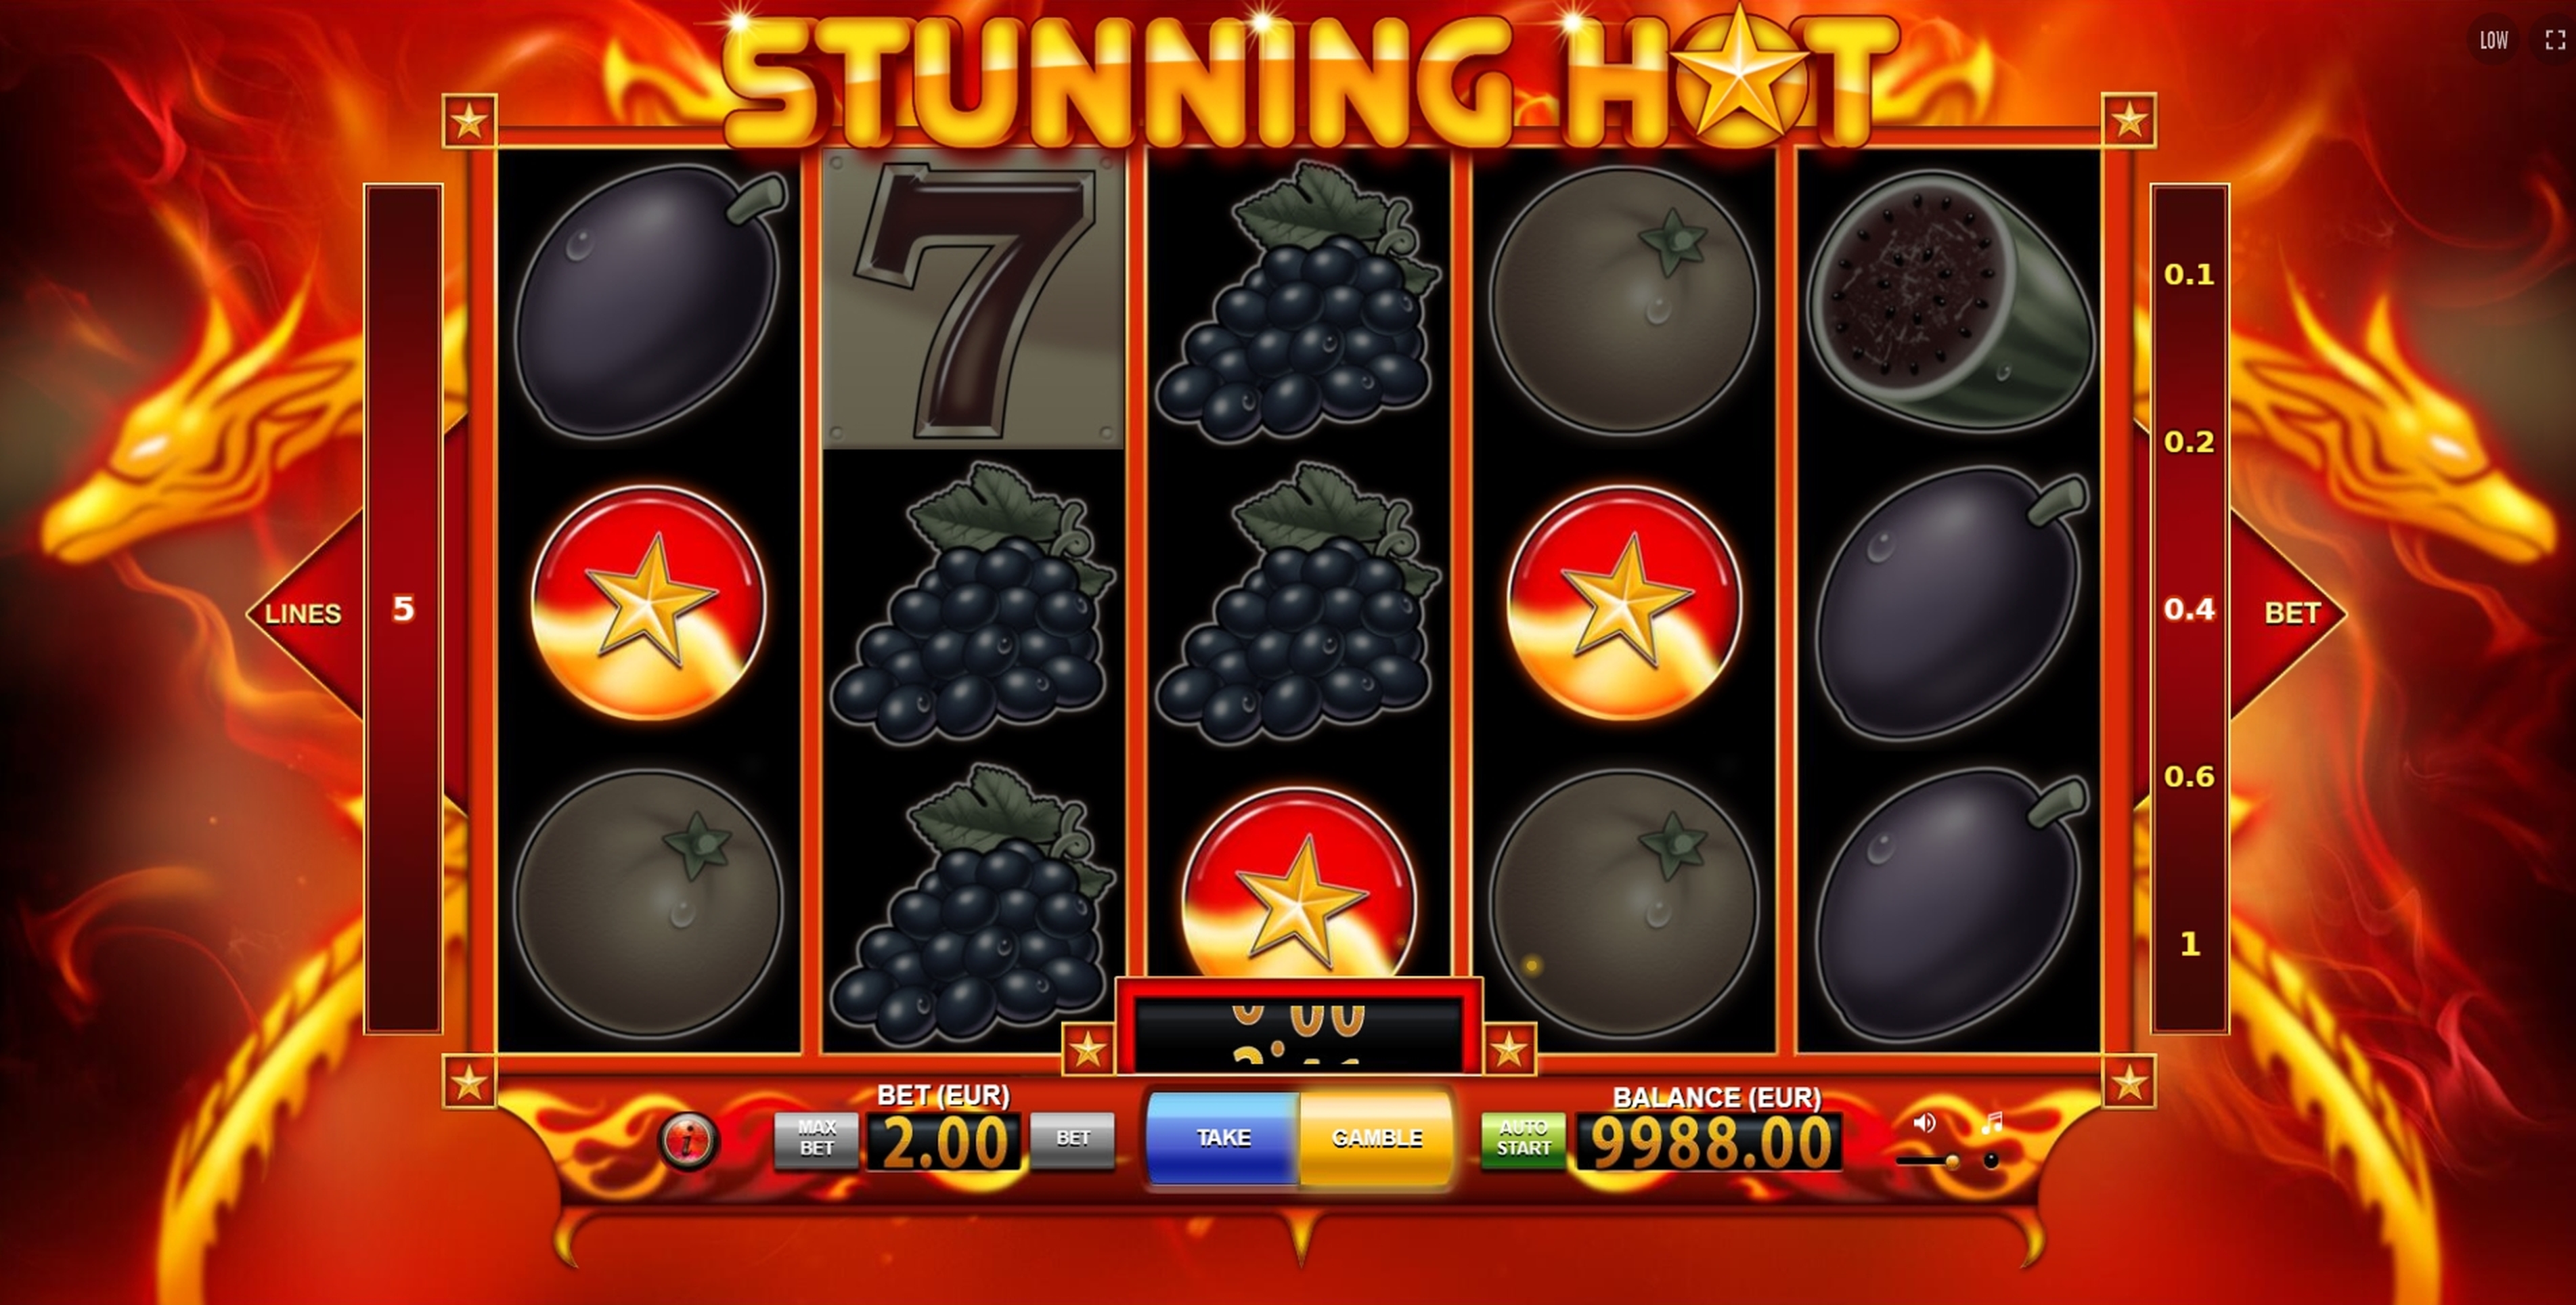 Win Money in Stunning Hot Free Slot Game by BF Games